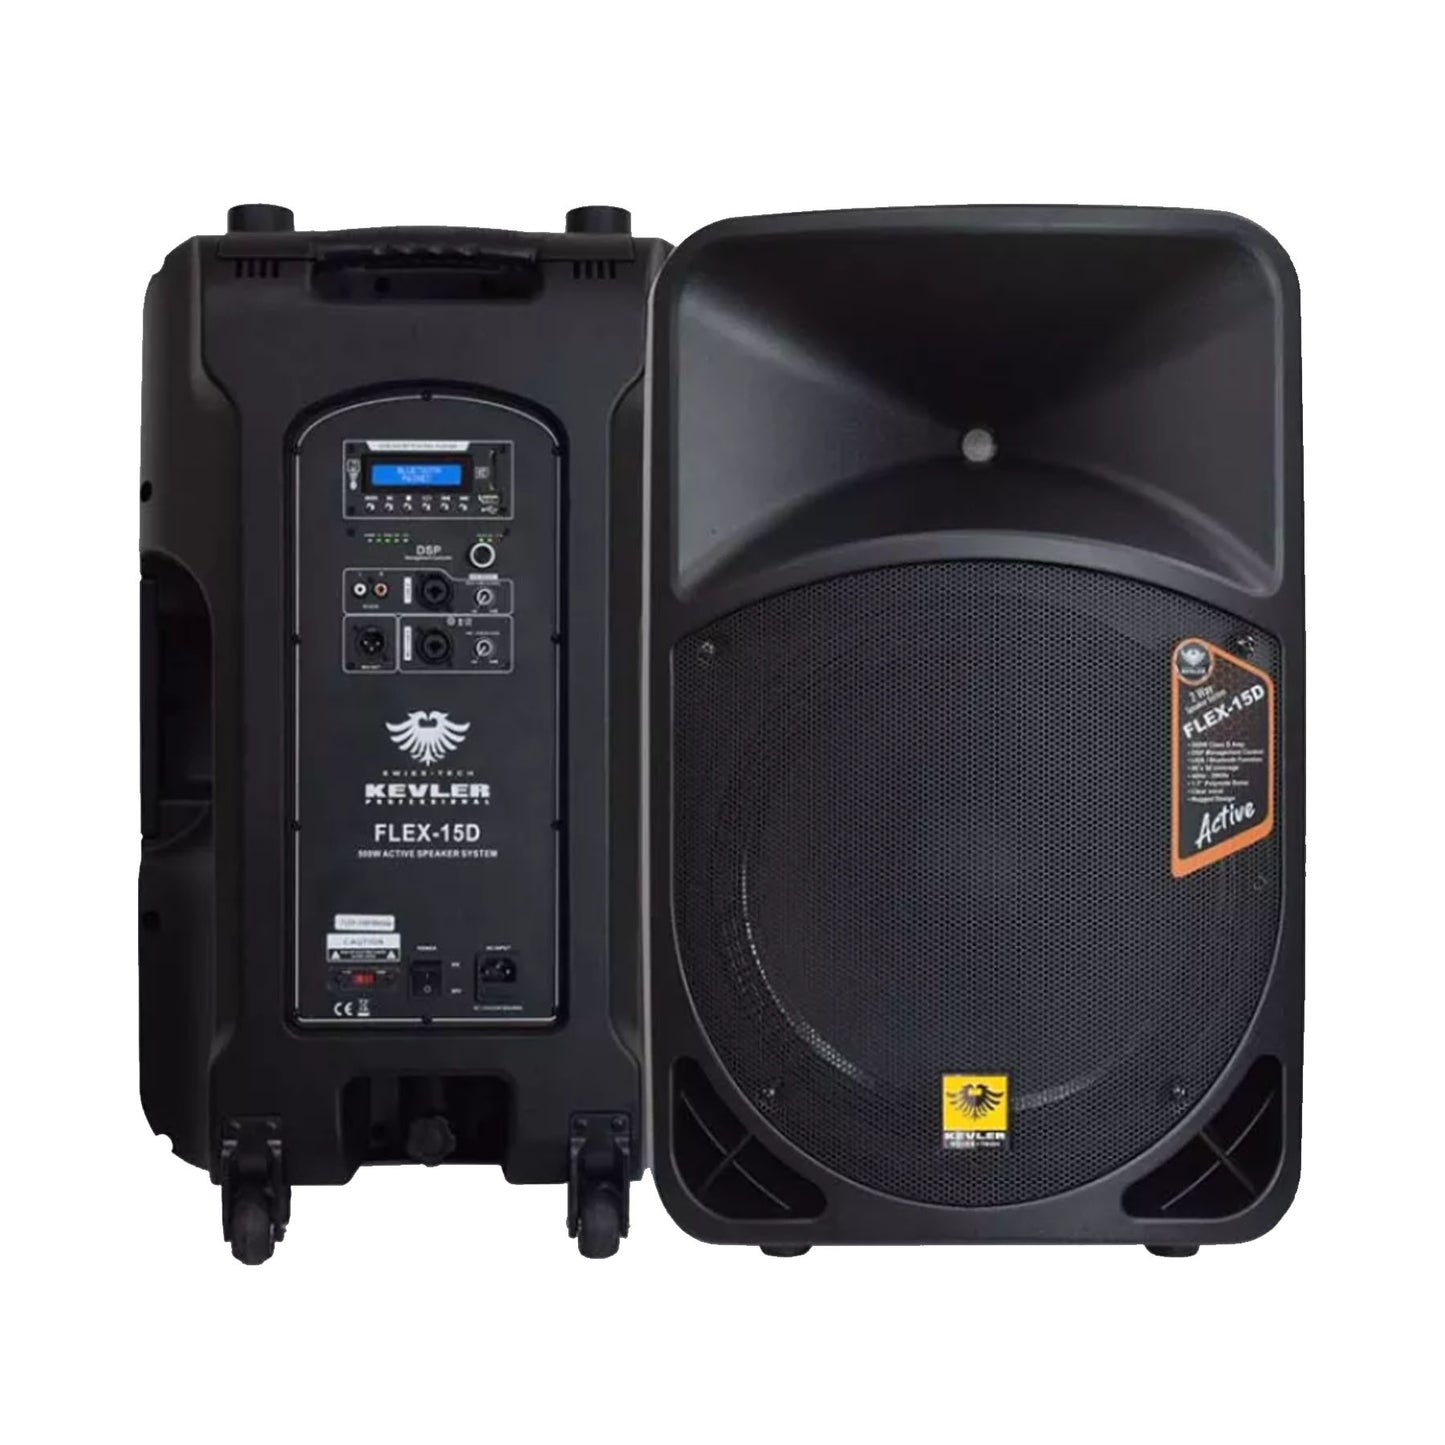 KEVLER FLEX-15D 15" 500W 2-way Bass Reflex Active Loud Speaker with LCD Display and Class D Amplifier, Built-In USB Port / Bluetooth Function, XLR, RCA Line, Mic I/O and DSP Controls